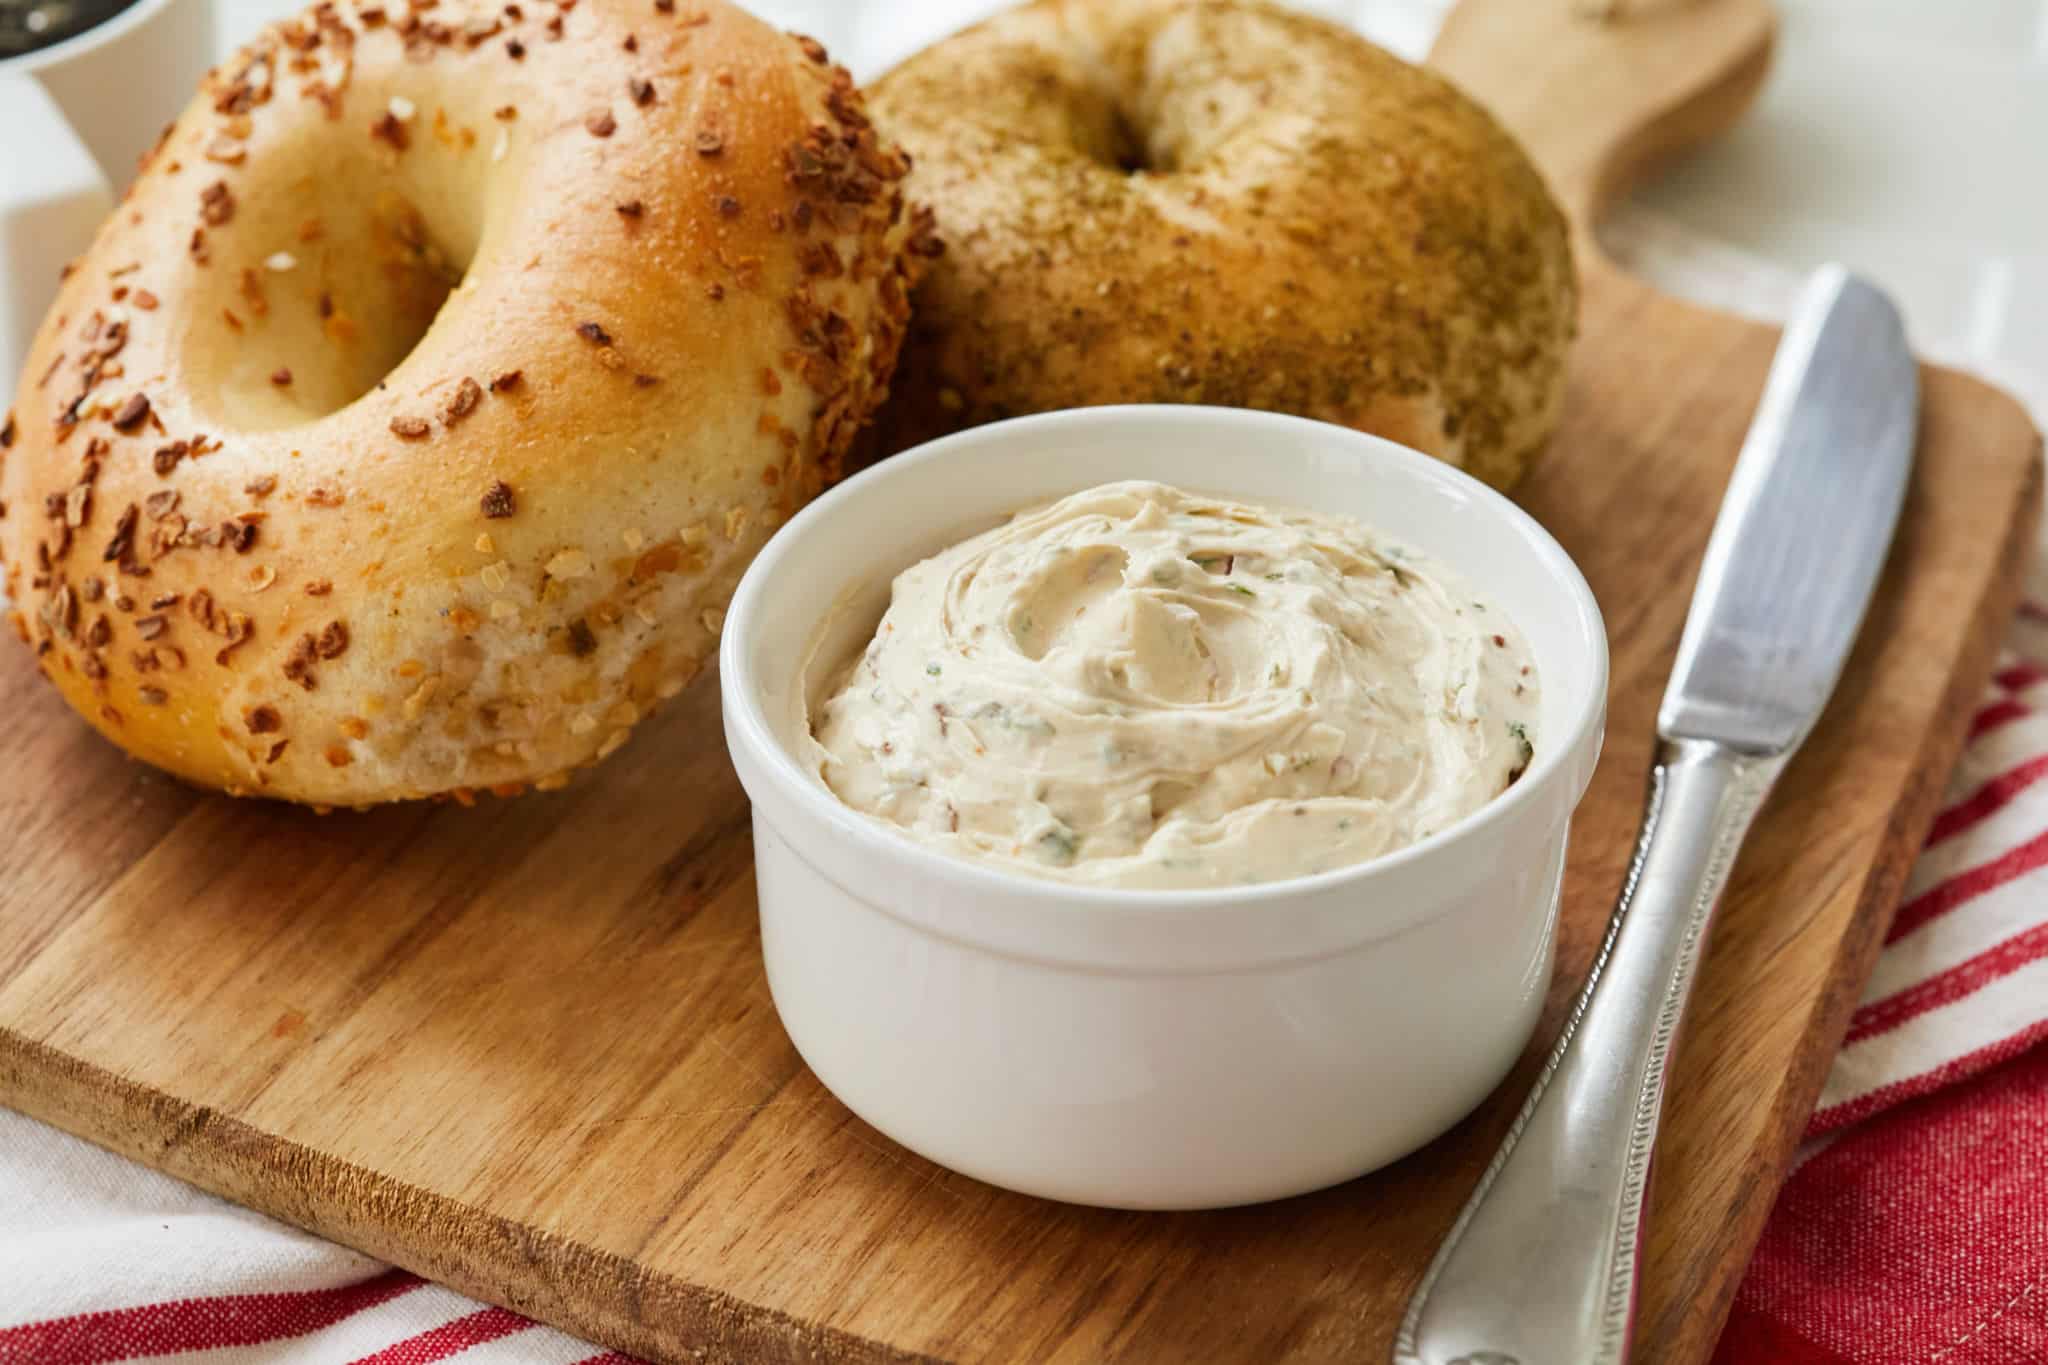 Homemade Sun-Dried Tomato Cream Cheese is served in a white dish next to a garlic bagel and a poppyseed bagel.